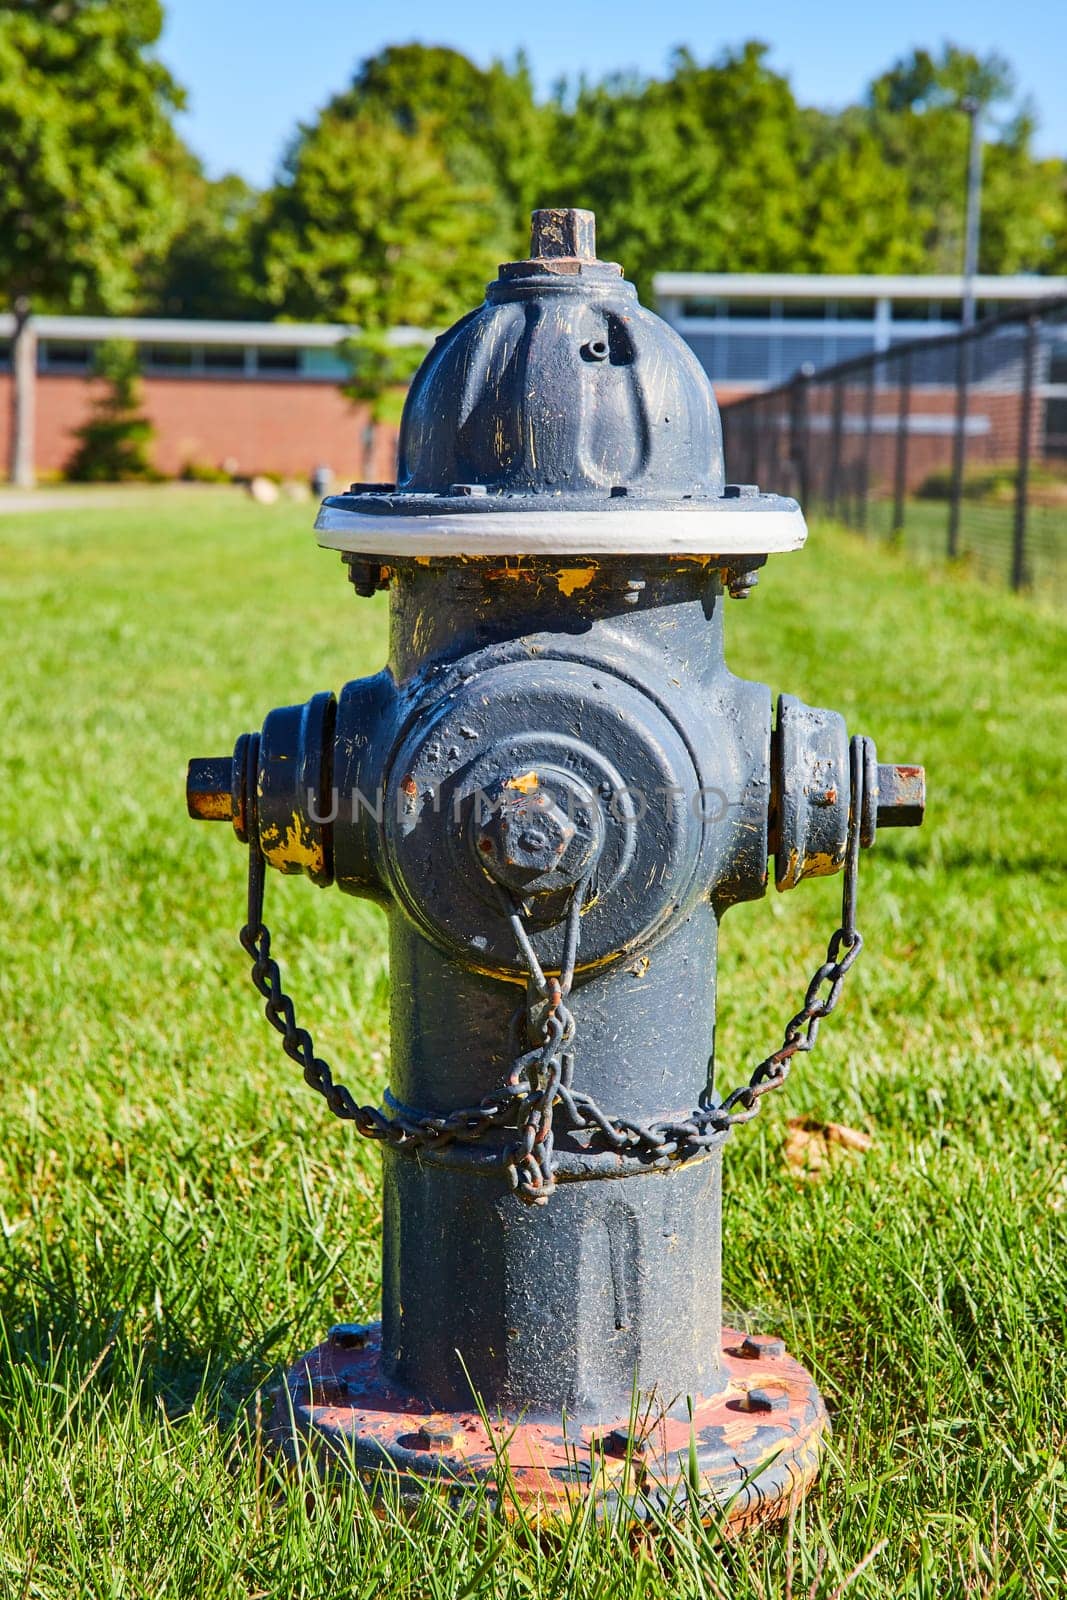 Chained Blue Fire Hydrant with Rust and Green Grass Background by njproductions